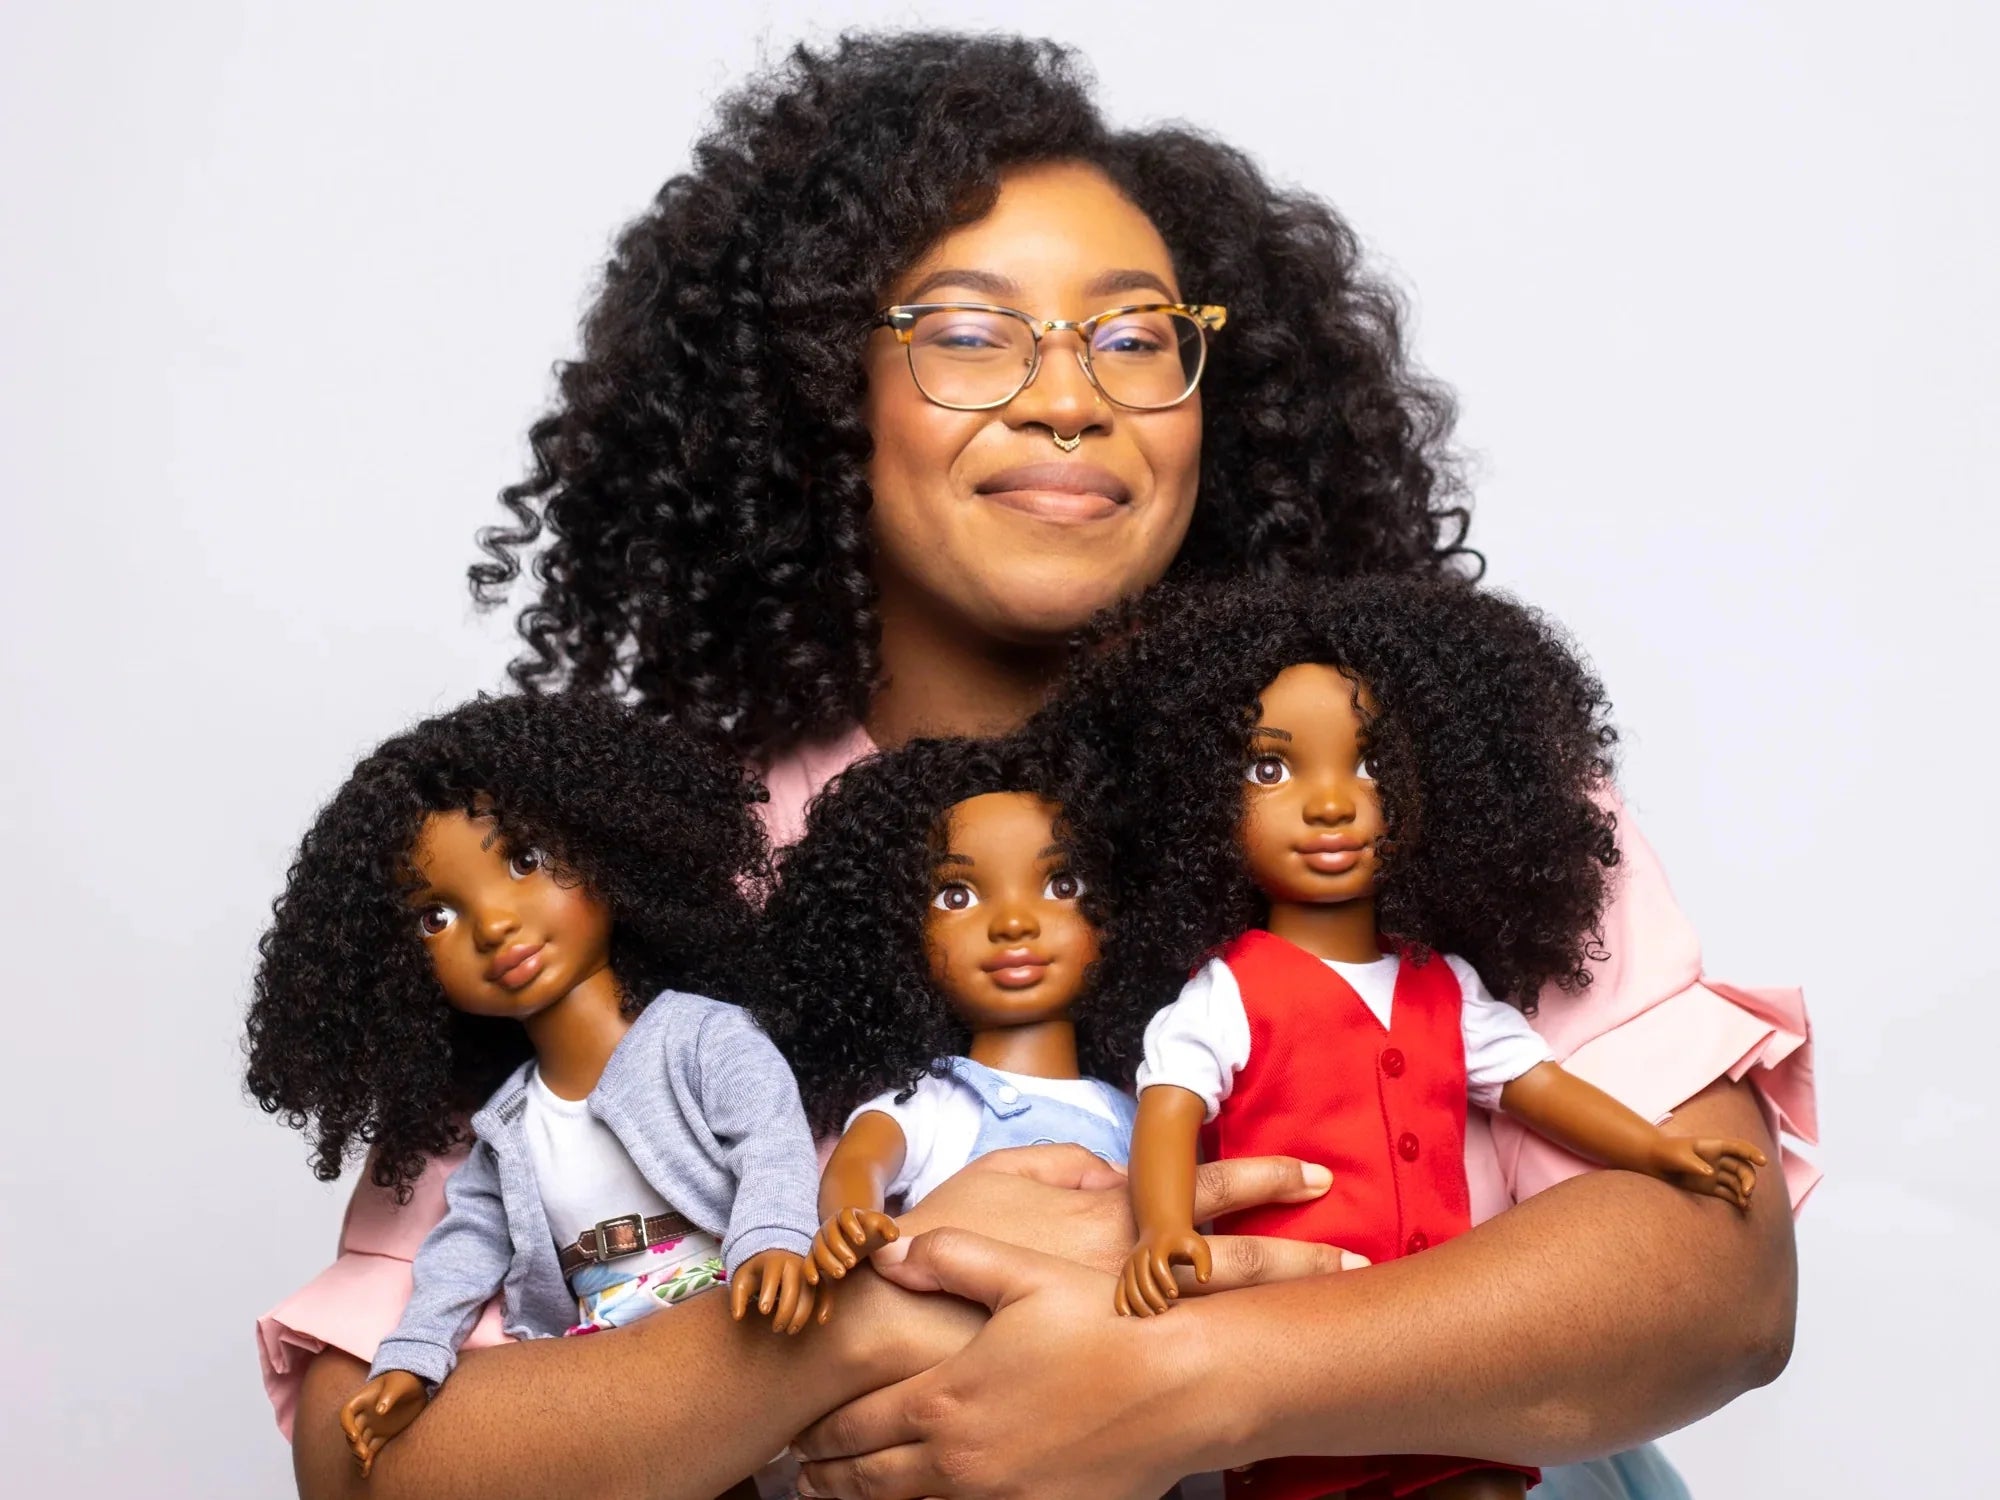 A woman holds several Black dolls